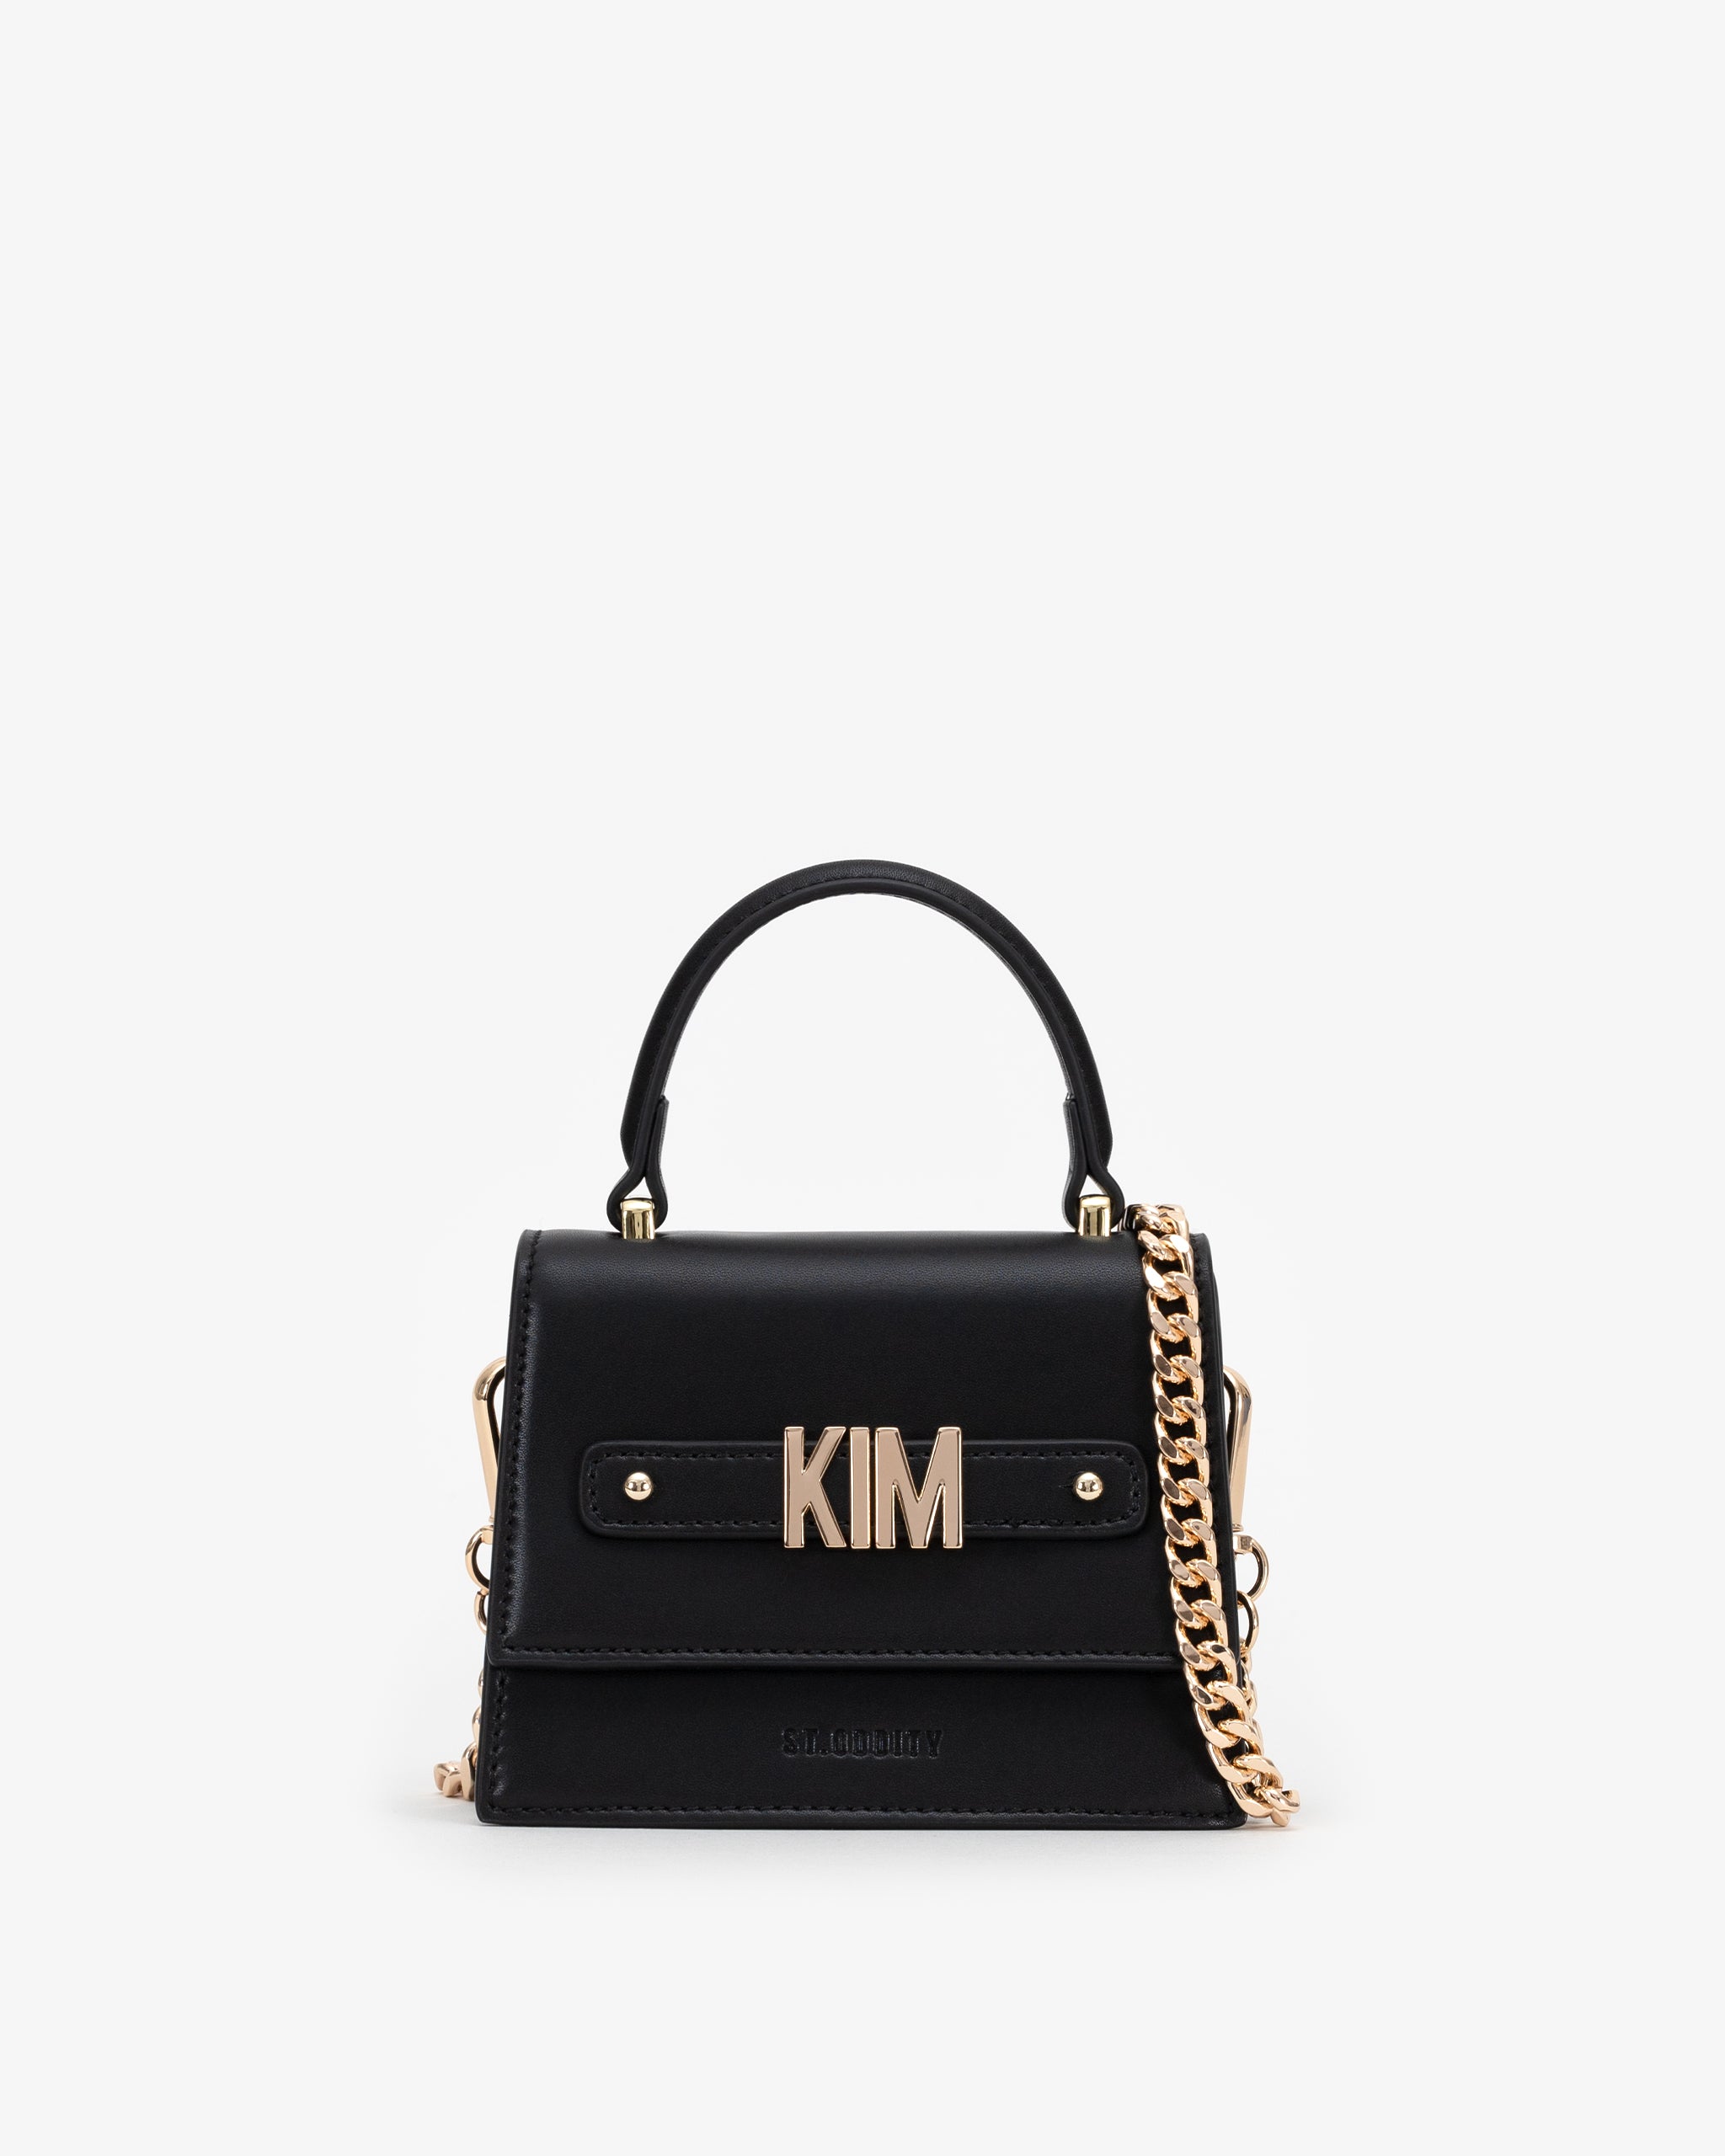 Pre-order (Mid-May): Mini Evening Bag in Black/Gold with Personalised Hardware